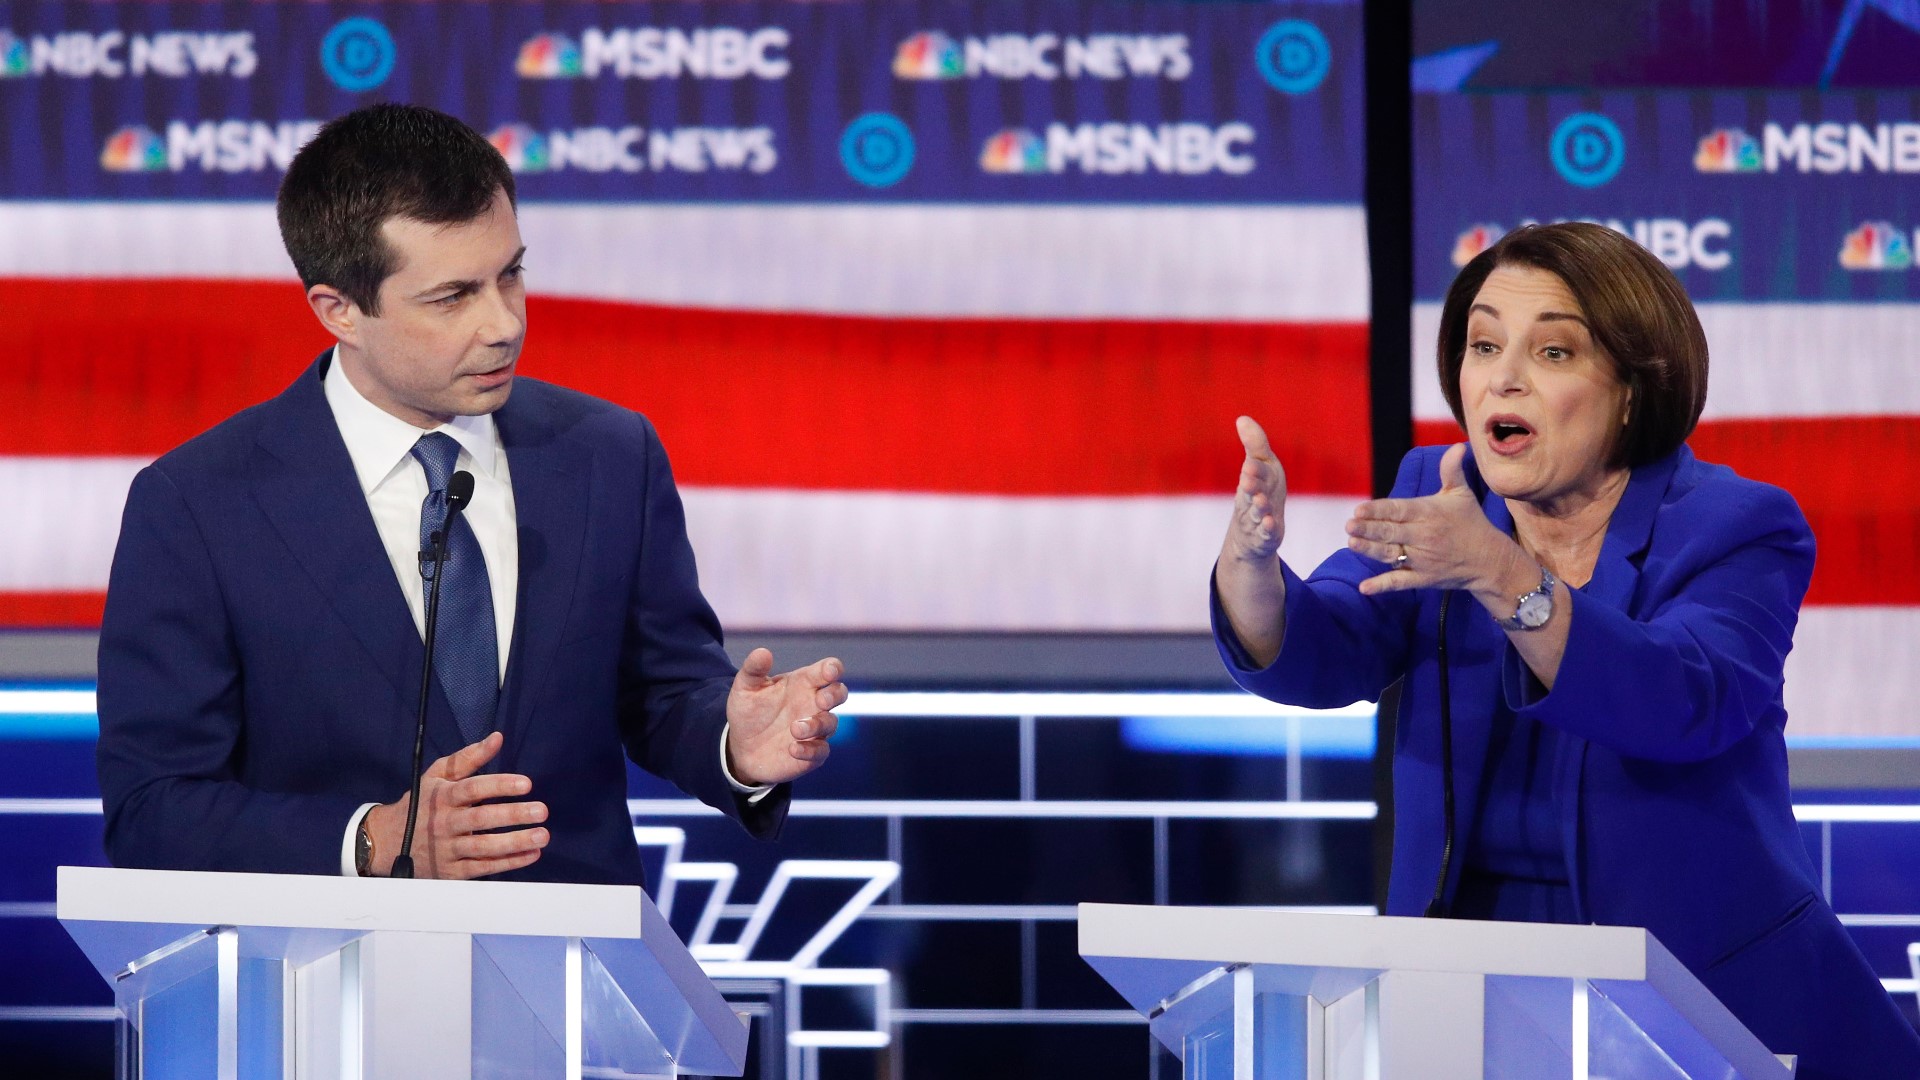 In the last week, multiple candidates dropped out, including Mayor Pete Buttigieg and Sen. Amy Klobuchar. The Verify team looked into where the campaign funds go.